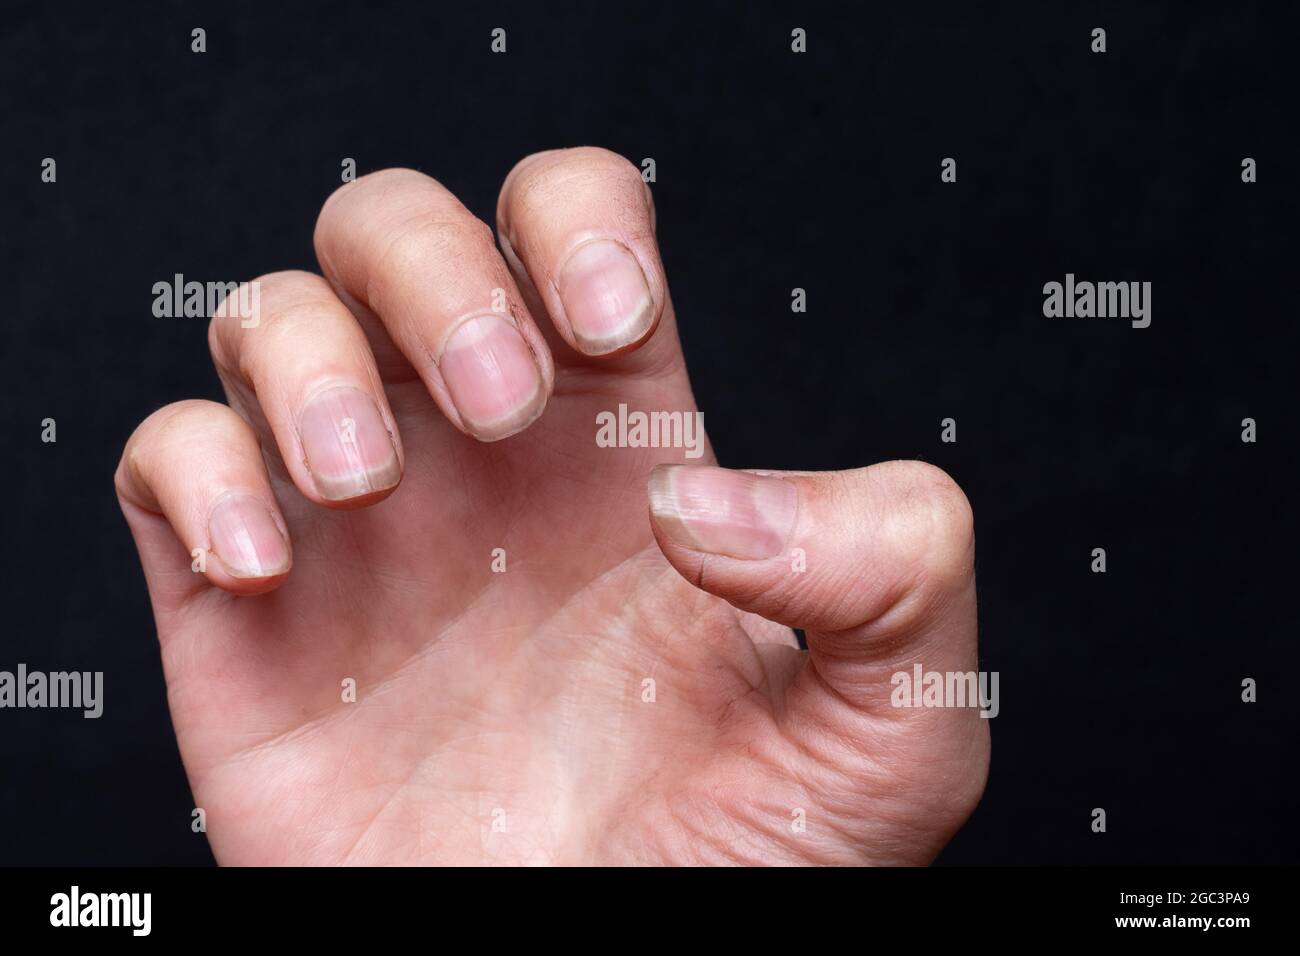 Close-up of female caucasian hand with dirty brittle nails, broken nails on a black background. Peeling on nails. Nail and hand care concept Stock Photo